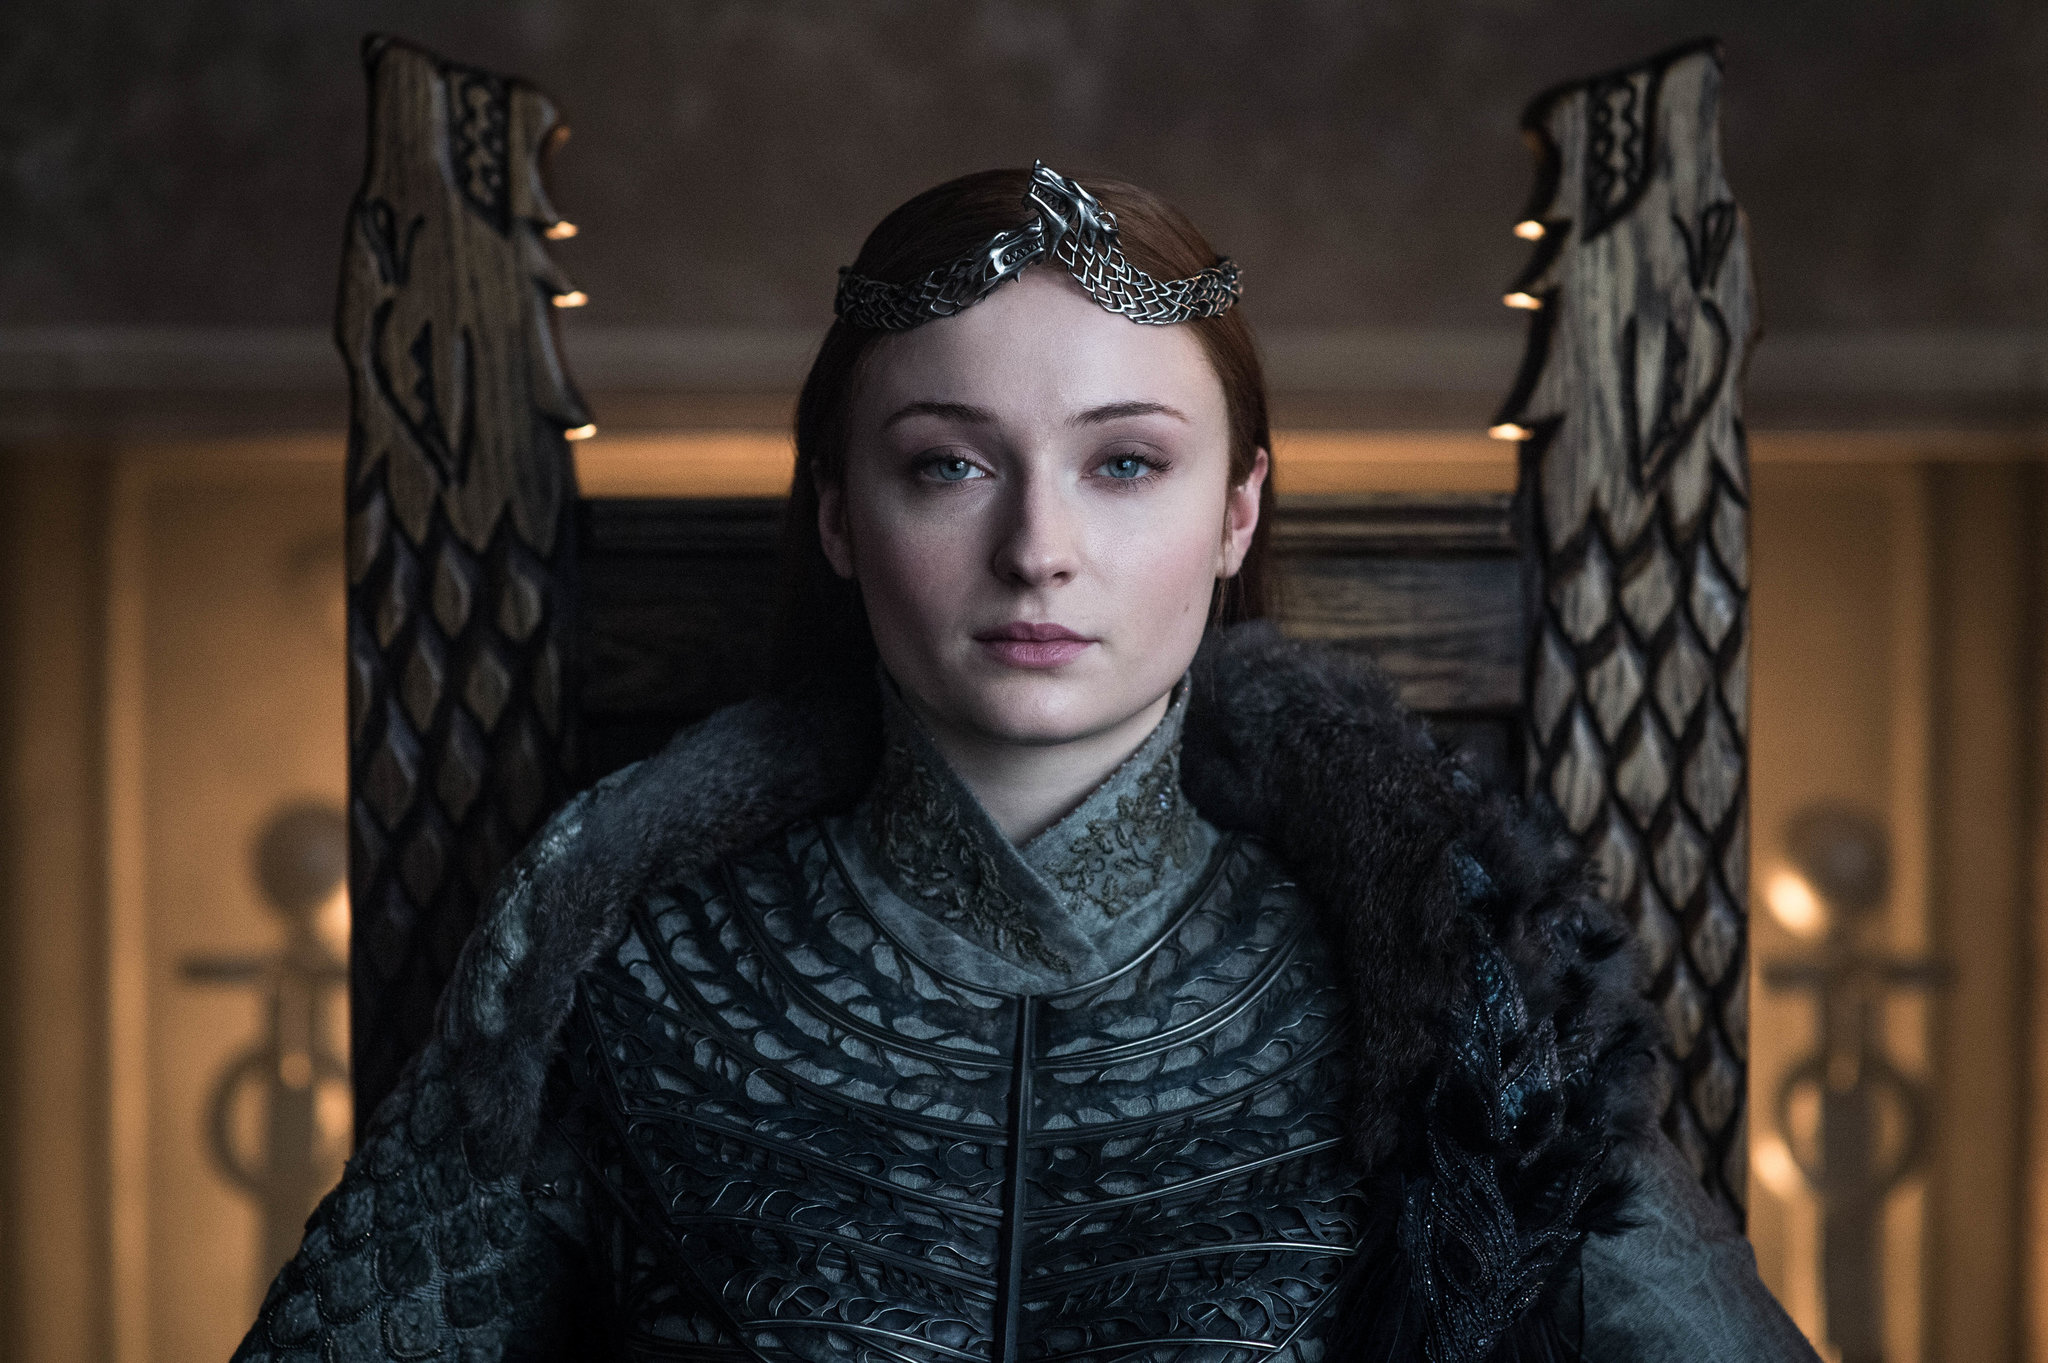 Sansa Stark, newly crowned Queen in the North, sits on the Stark throne with a crown on her head, staring down the camera.